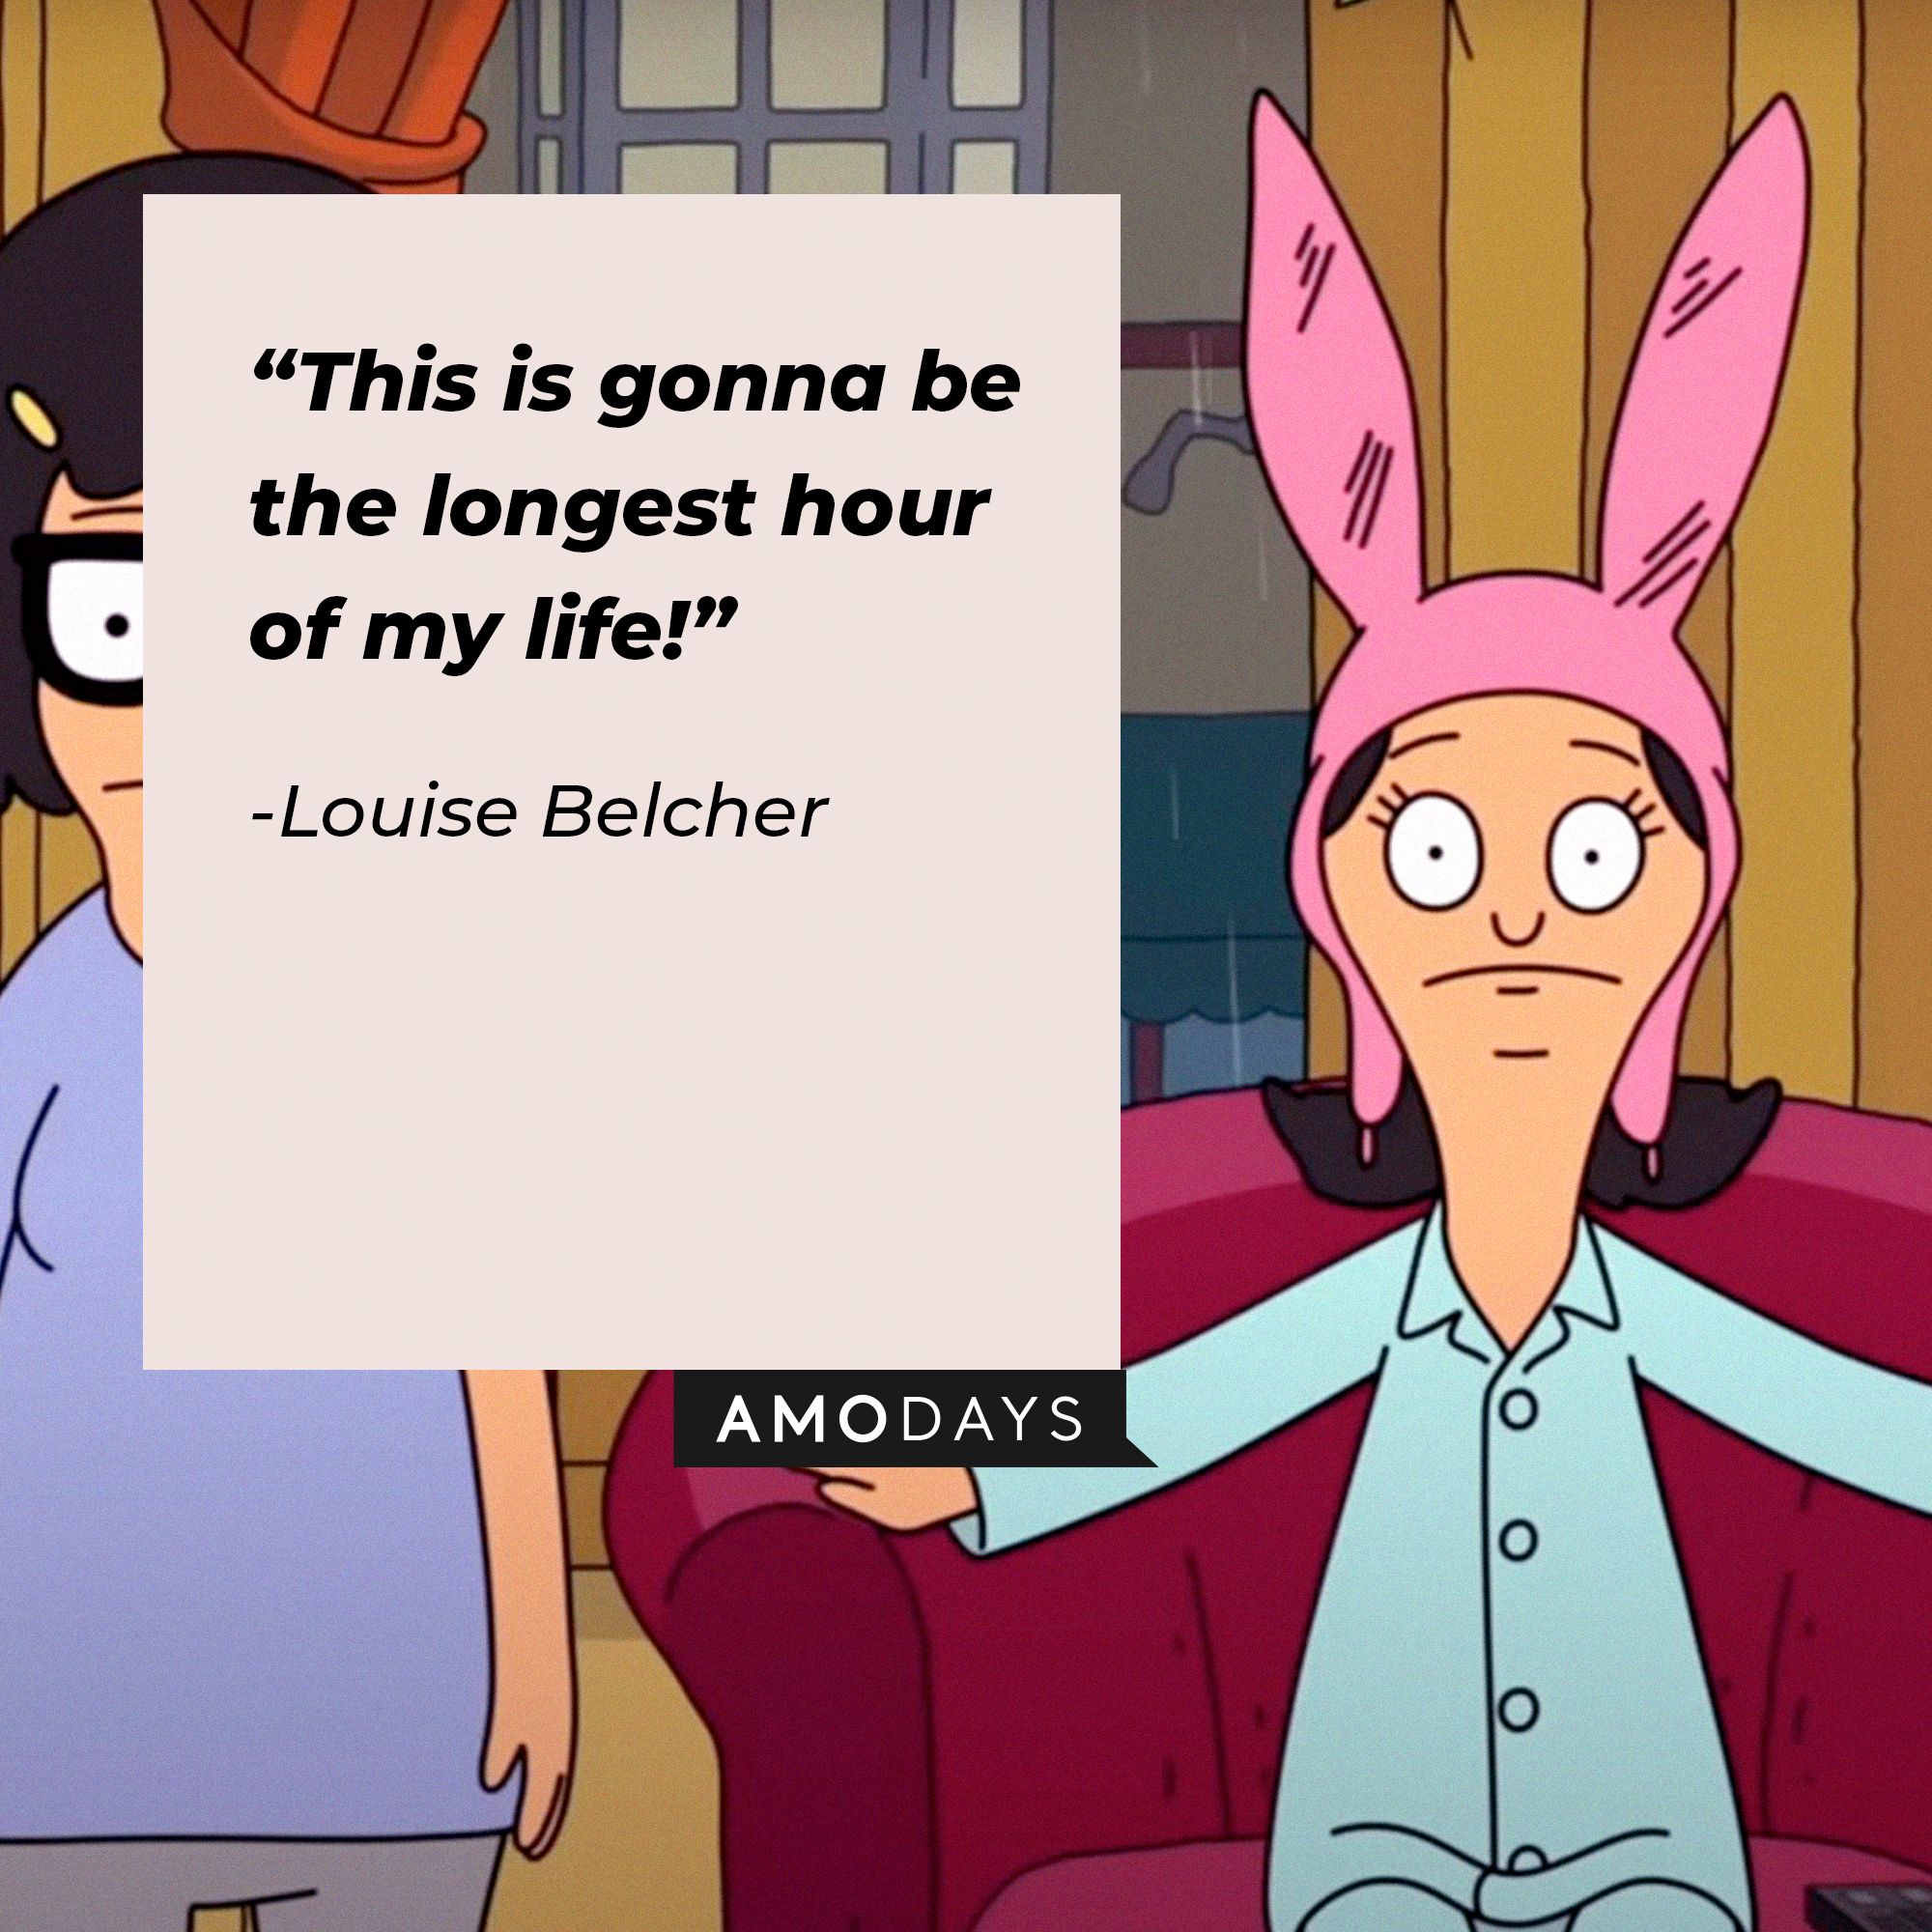 An image of Louise Belcher with her quote:  “This is gonna be the longest hour of my life!”  | Source:  facebook.com/BobsBurgers